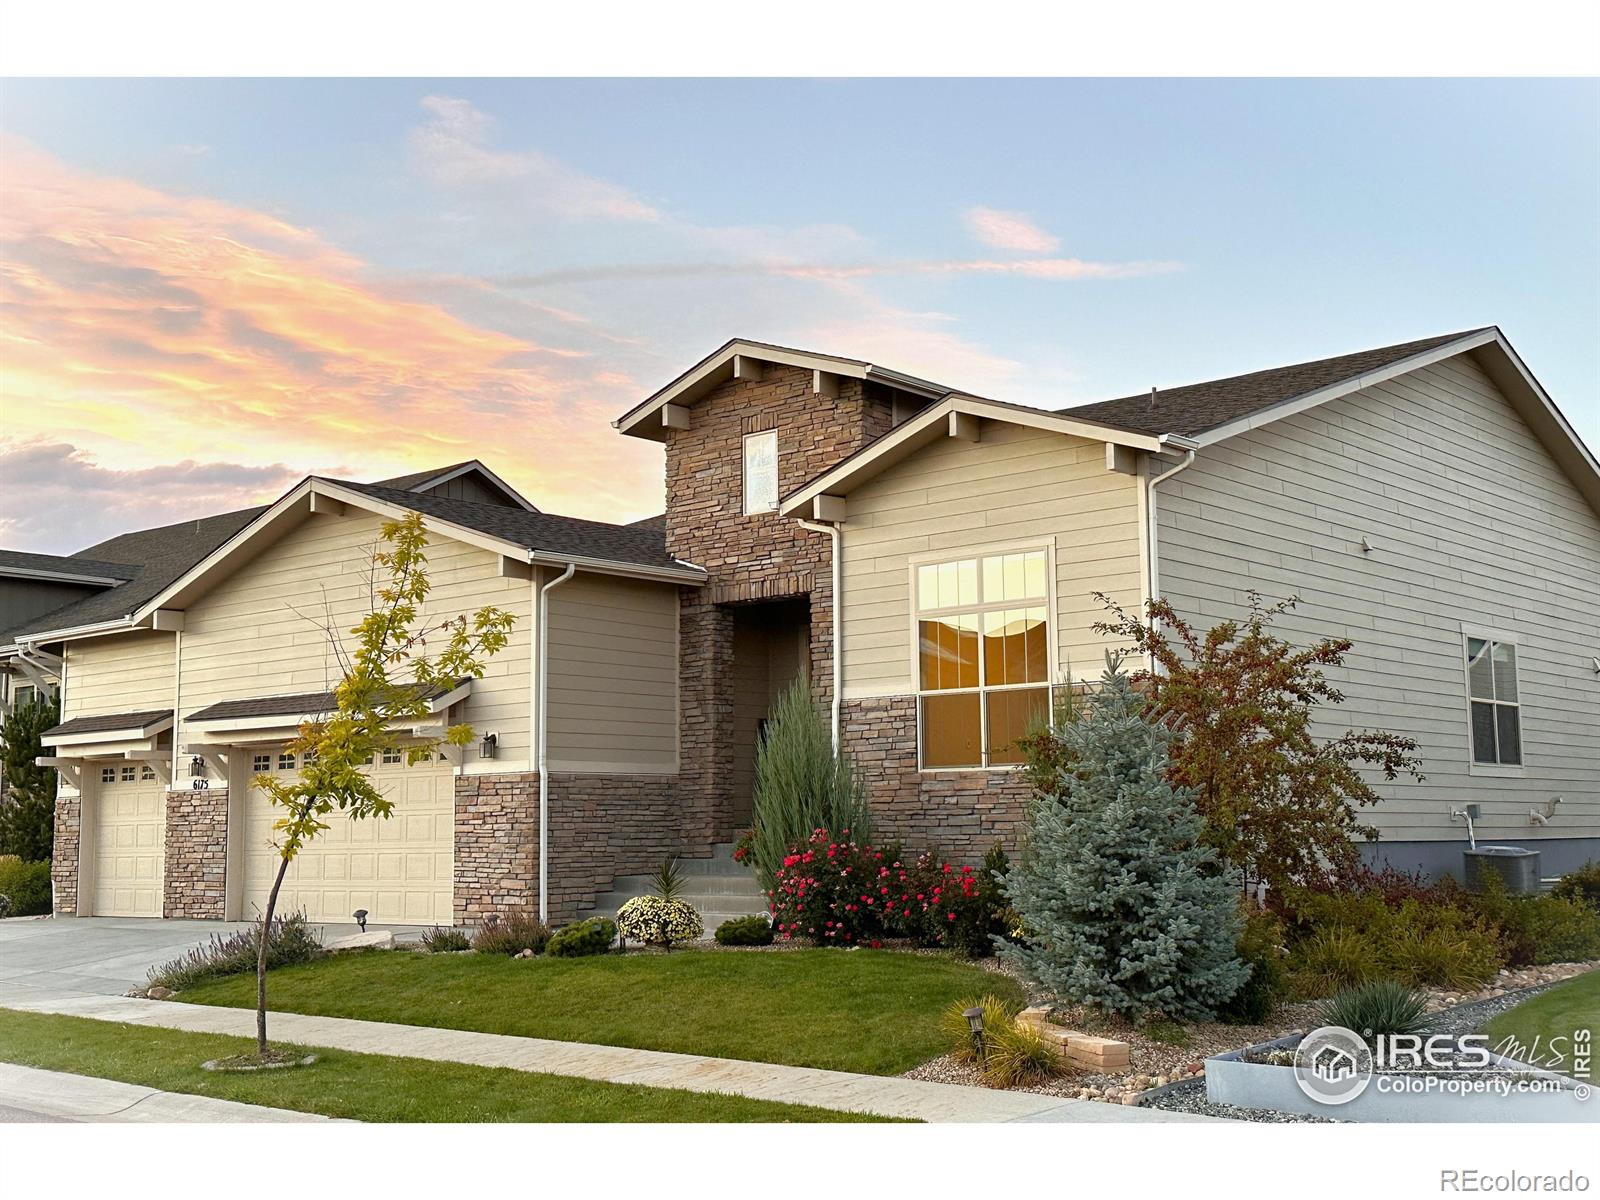 6175  Eagle Roost Drive, fort collins MLS: 456789997117 Beds: 3 Baths: 3 Price: $949,900